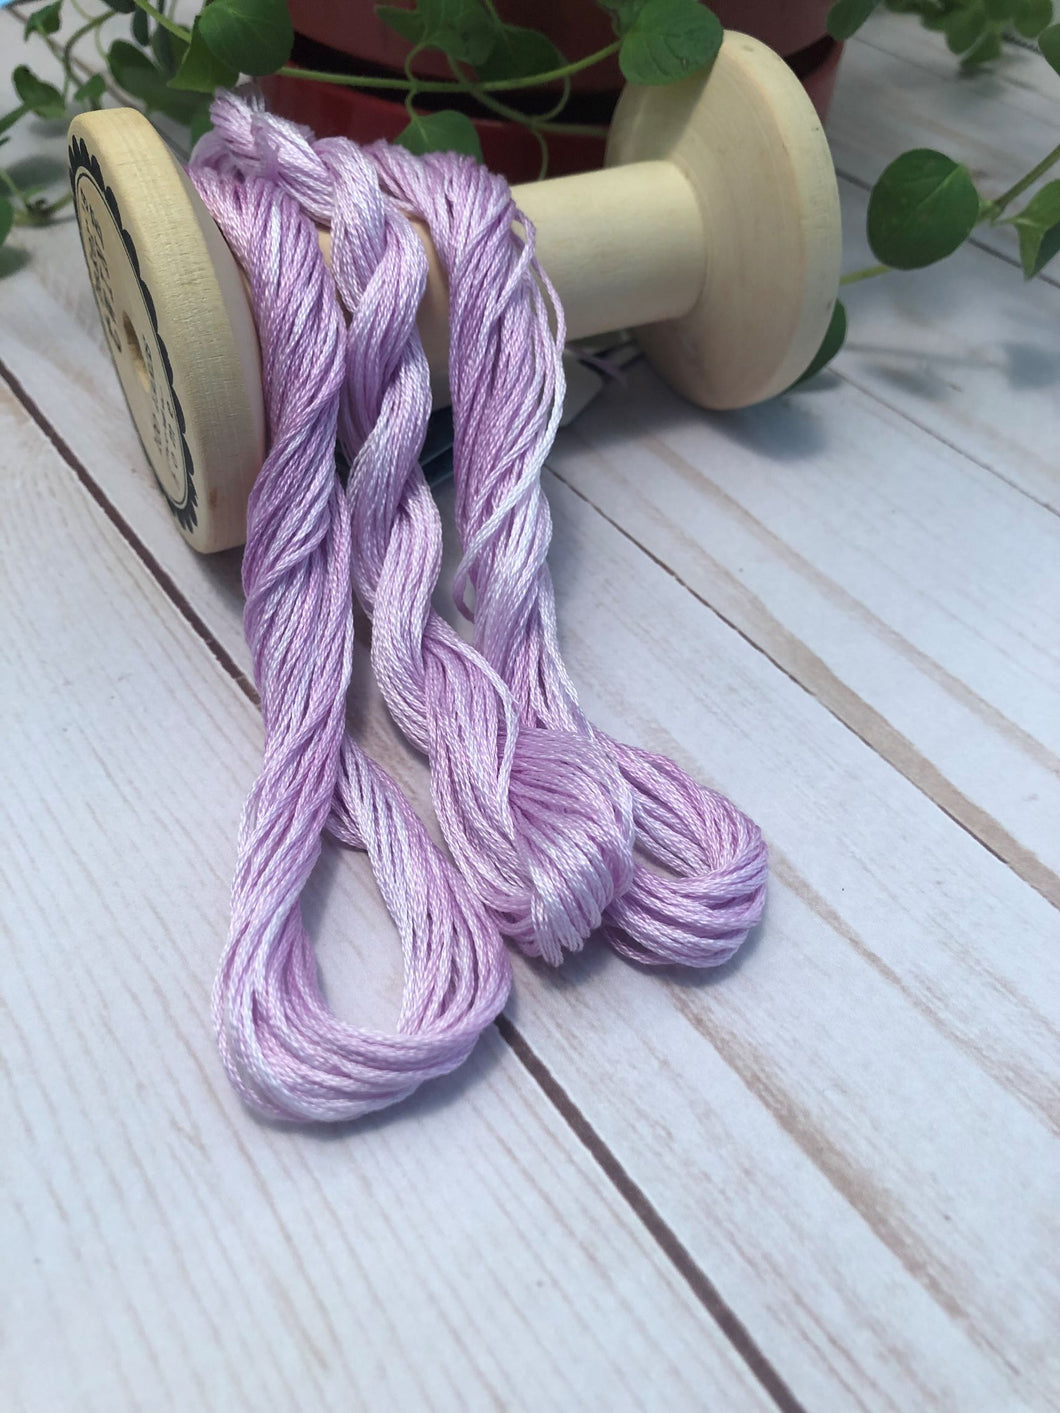 Three skeins of a variegated 6 strand floss in light to medium plum purple color .